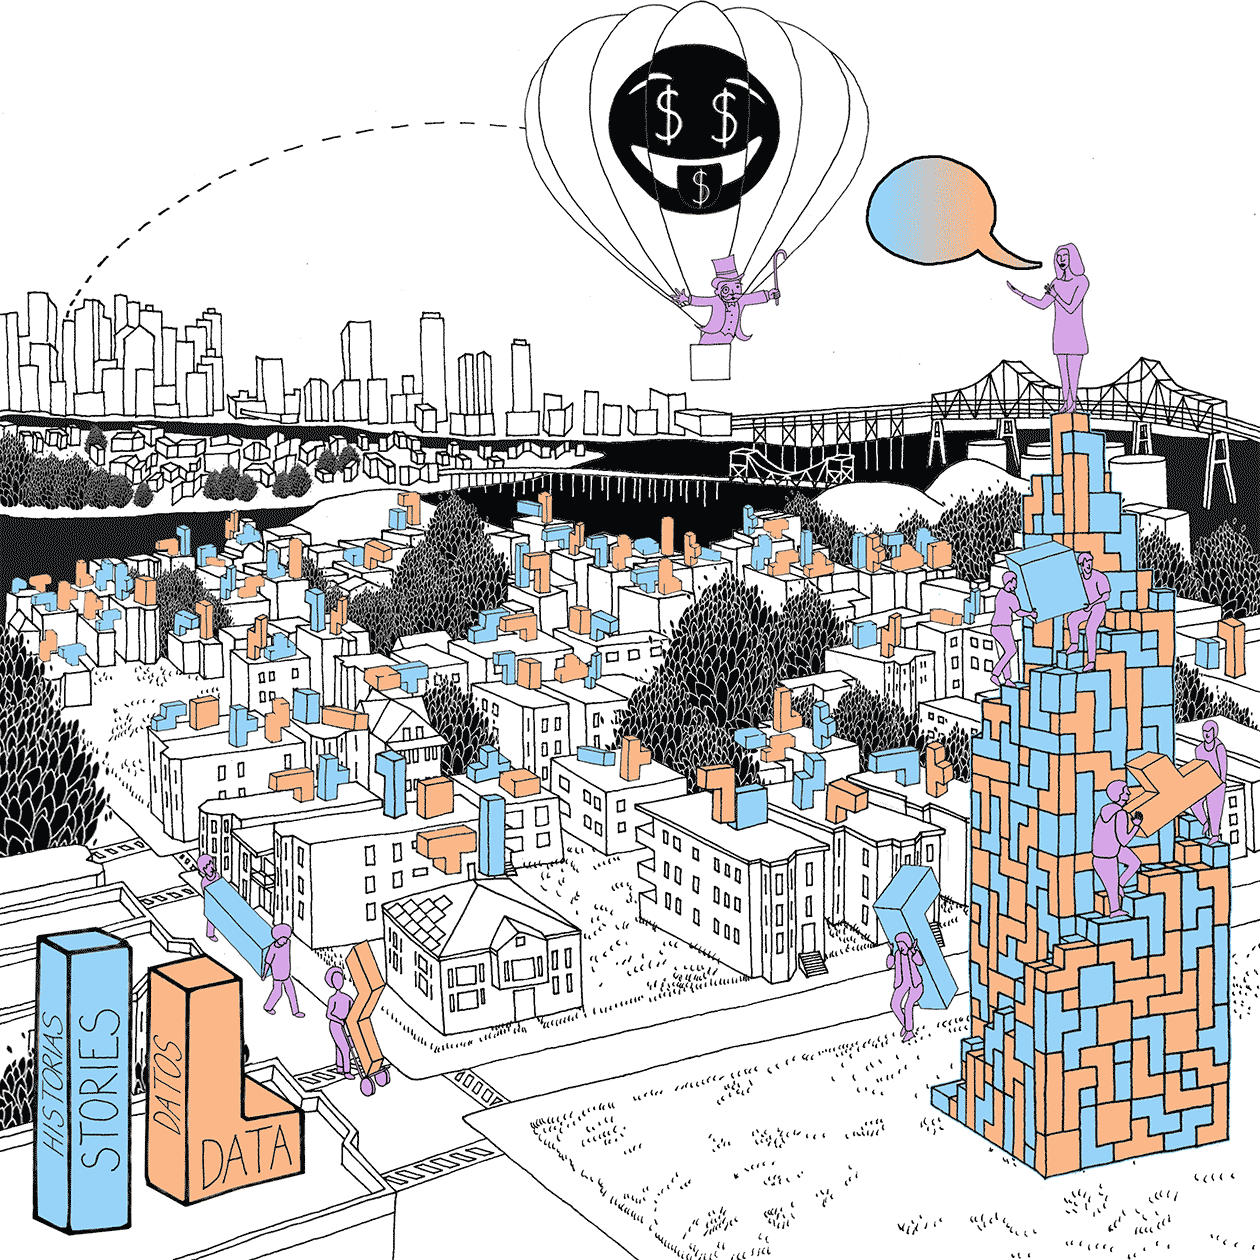 Line drawing showing the landscape of East Boston, with central Boston in the background across the Chelsea River. Buildings in the landscape are made up of colored blocks representing stories and data, and city residents are shown carrying and assembling the blocks to form a tower. At the top of the tower a resident organizer is standing and having a conversation with a figure representing a developer, who is standing in a hot air balloon with a giant dollar sign on it.